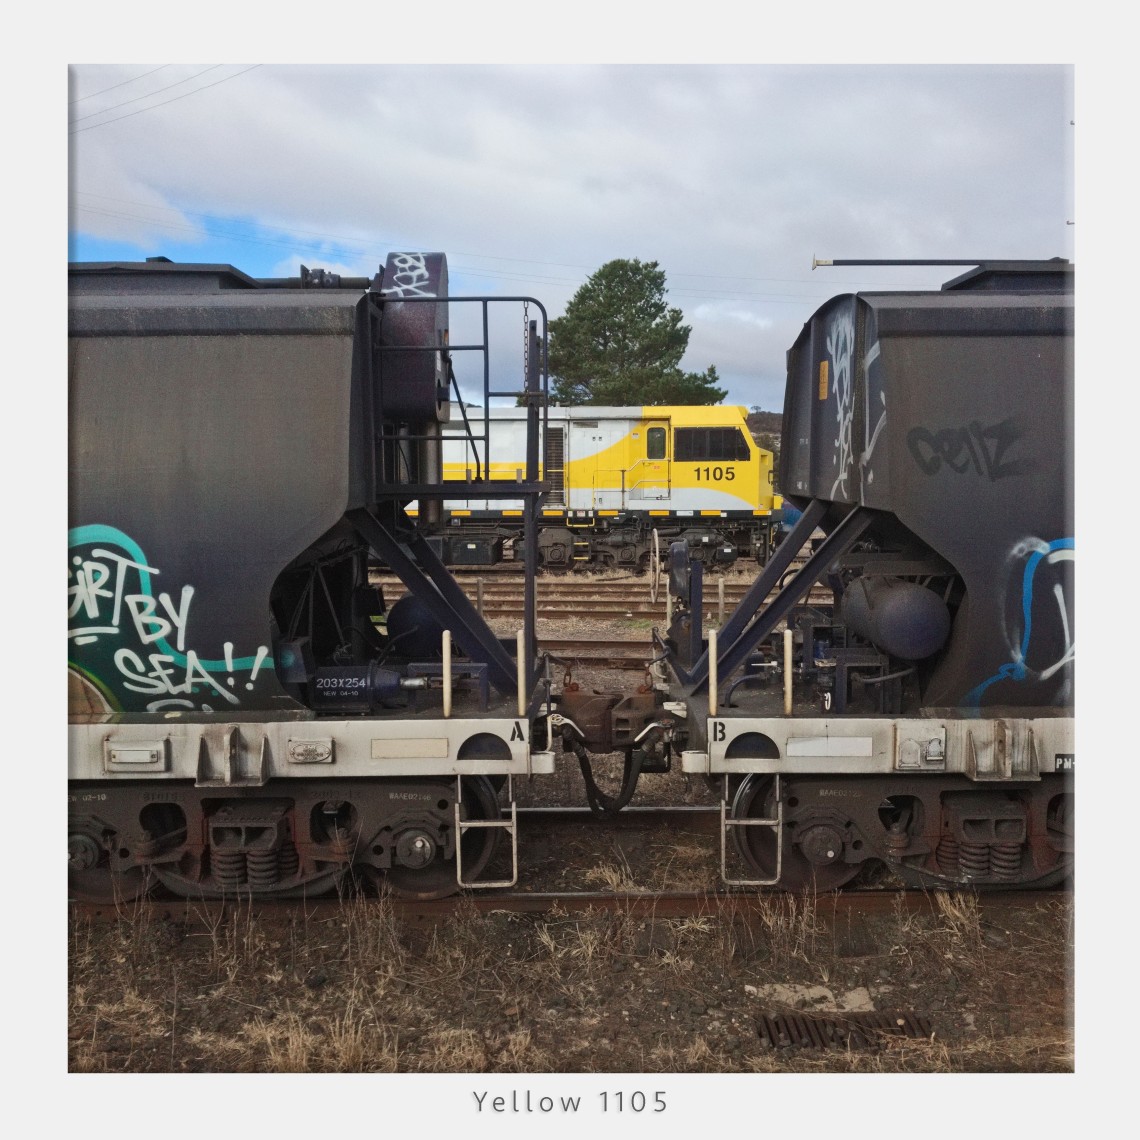 Yellow locomotive flanked by grain freighters taken using DNG on iPhone Pro 10.5